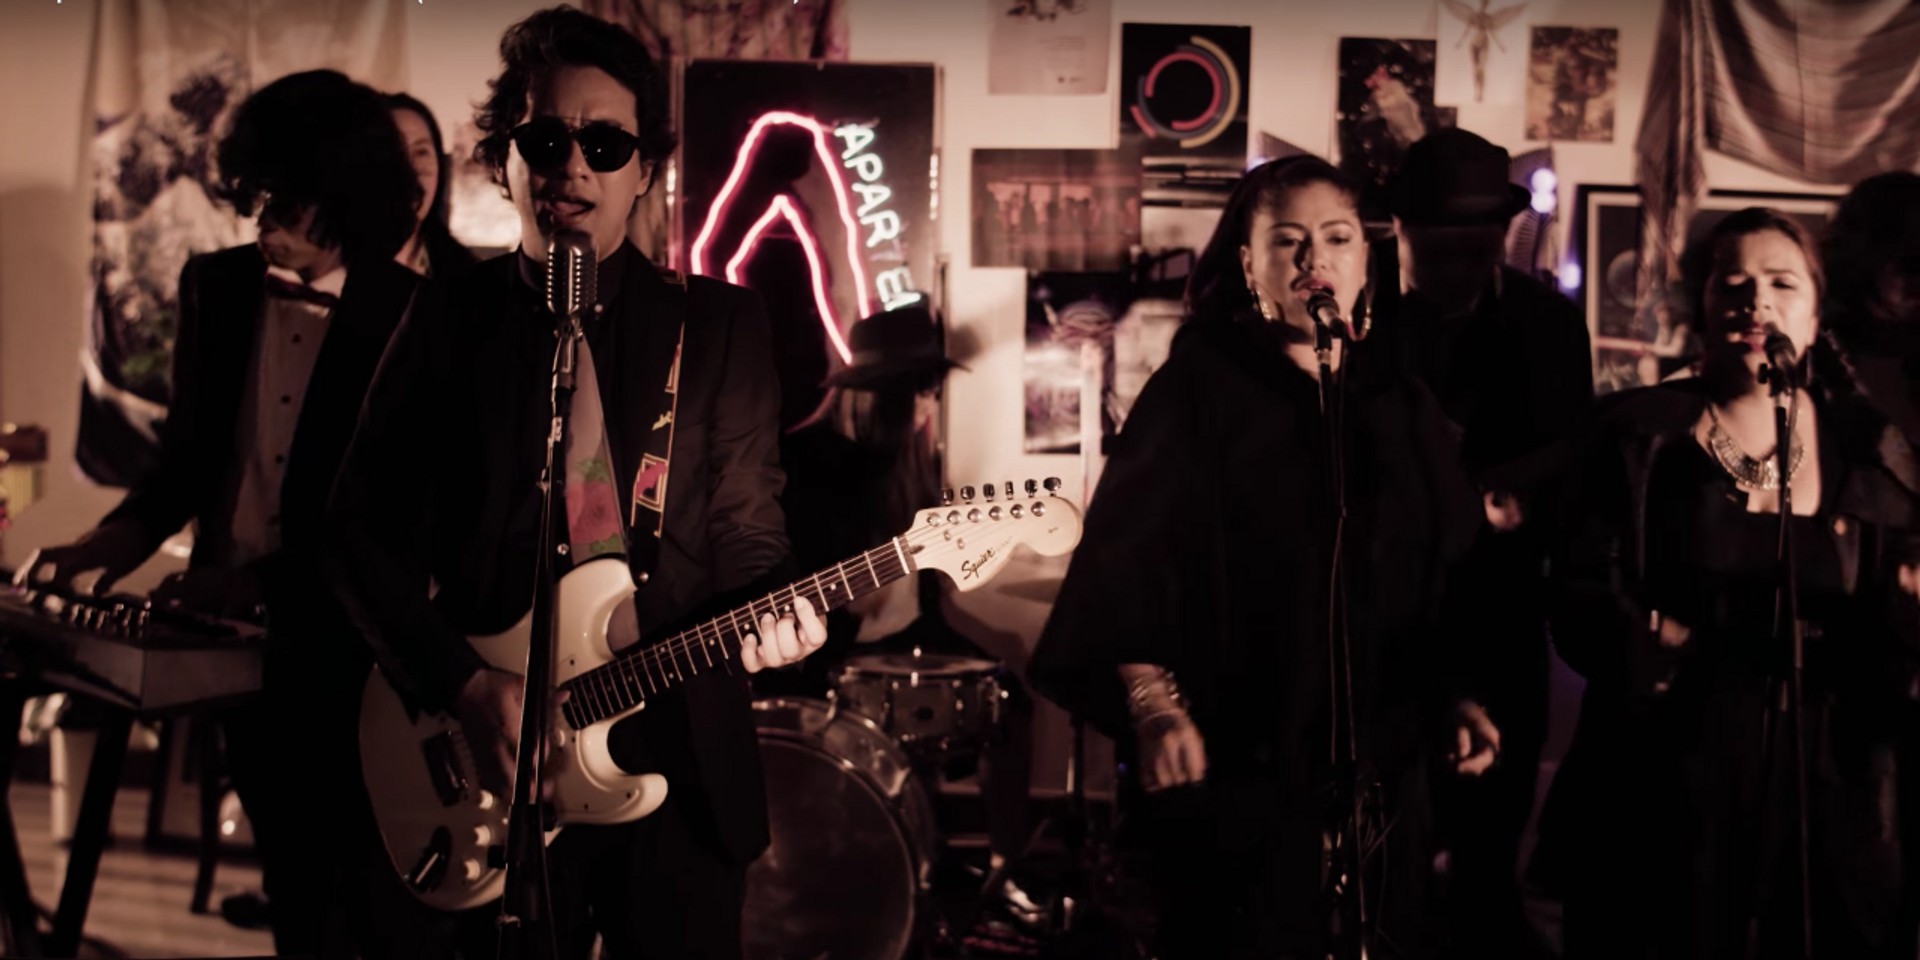 WATCH: Apartel releases giallo-inspired music video for "Sala sa Init"